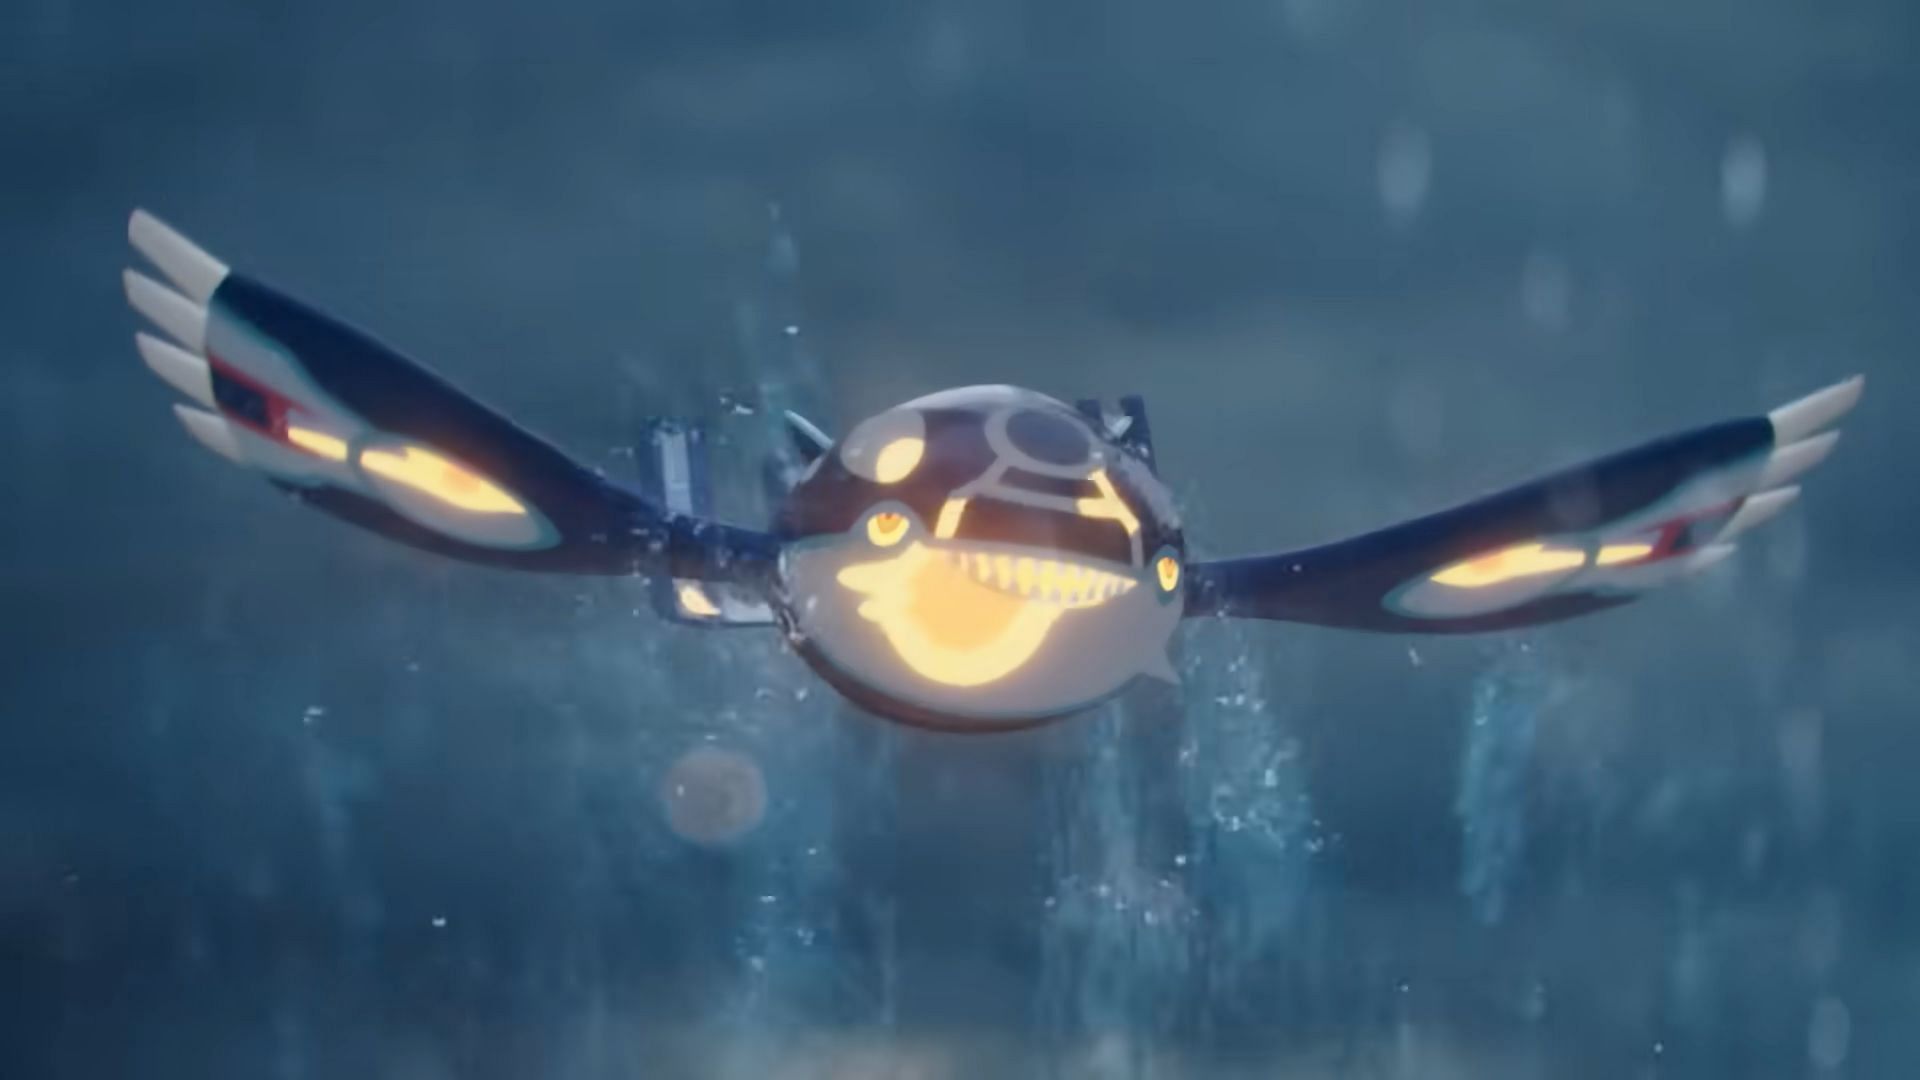 Pokemon GO Primal Kyogre raid guide: Best counters and Weaknesses